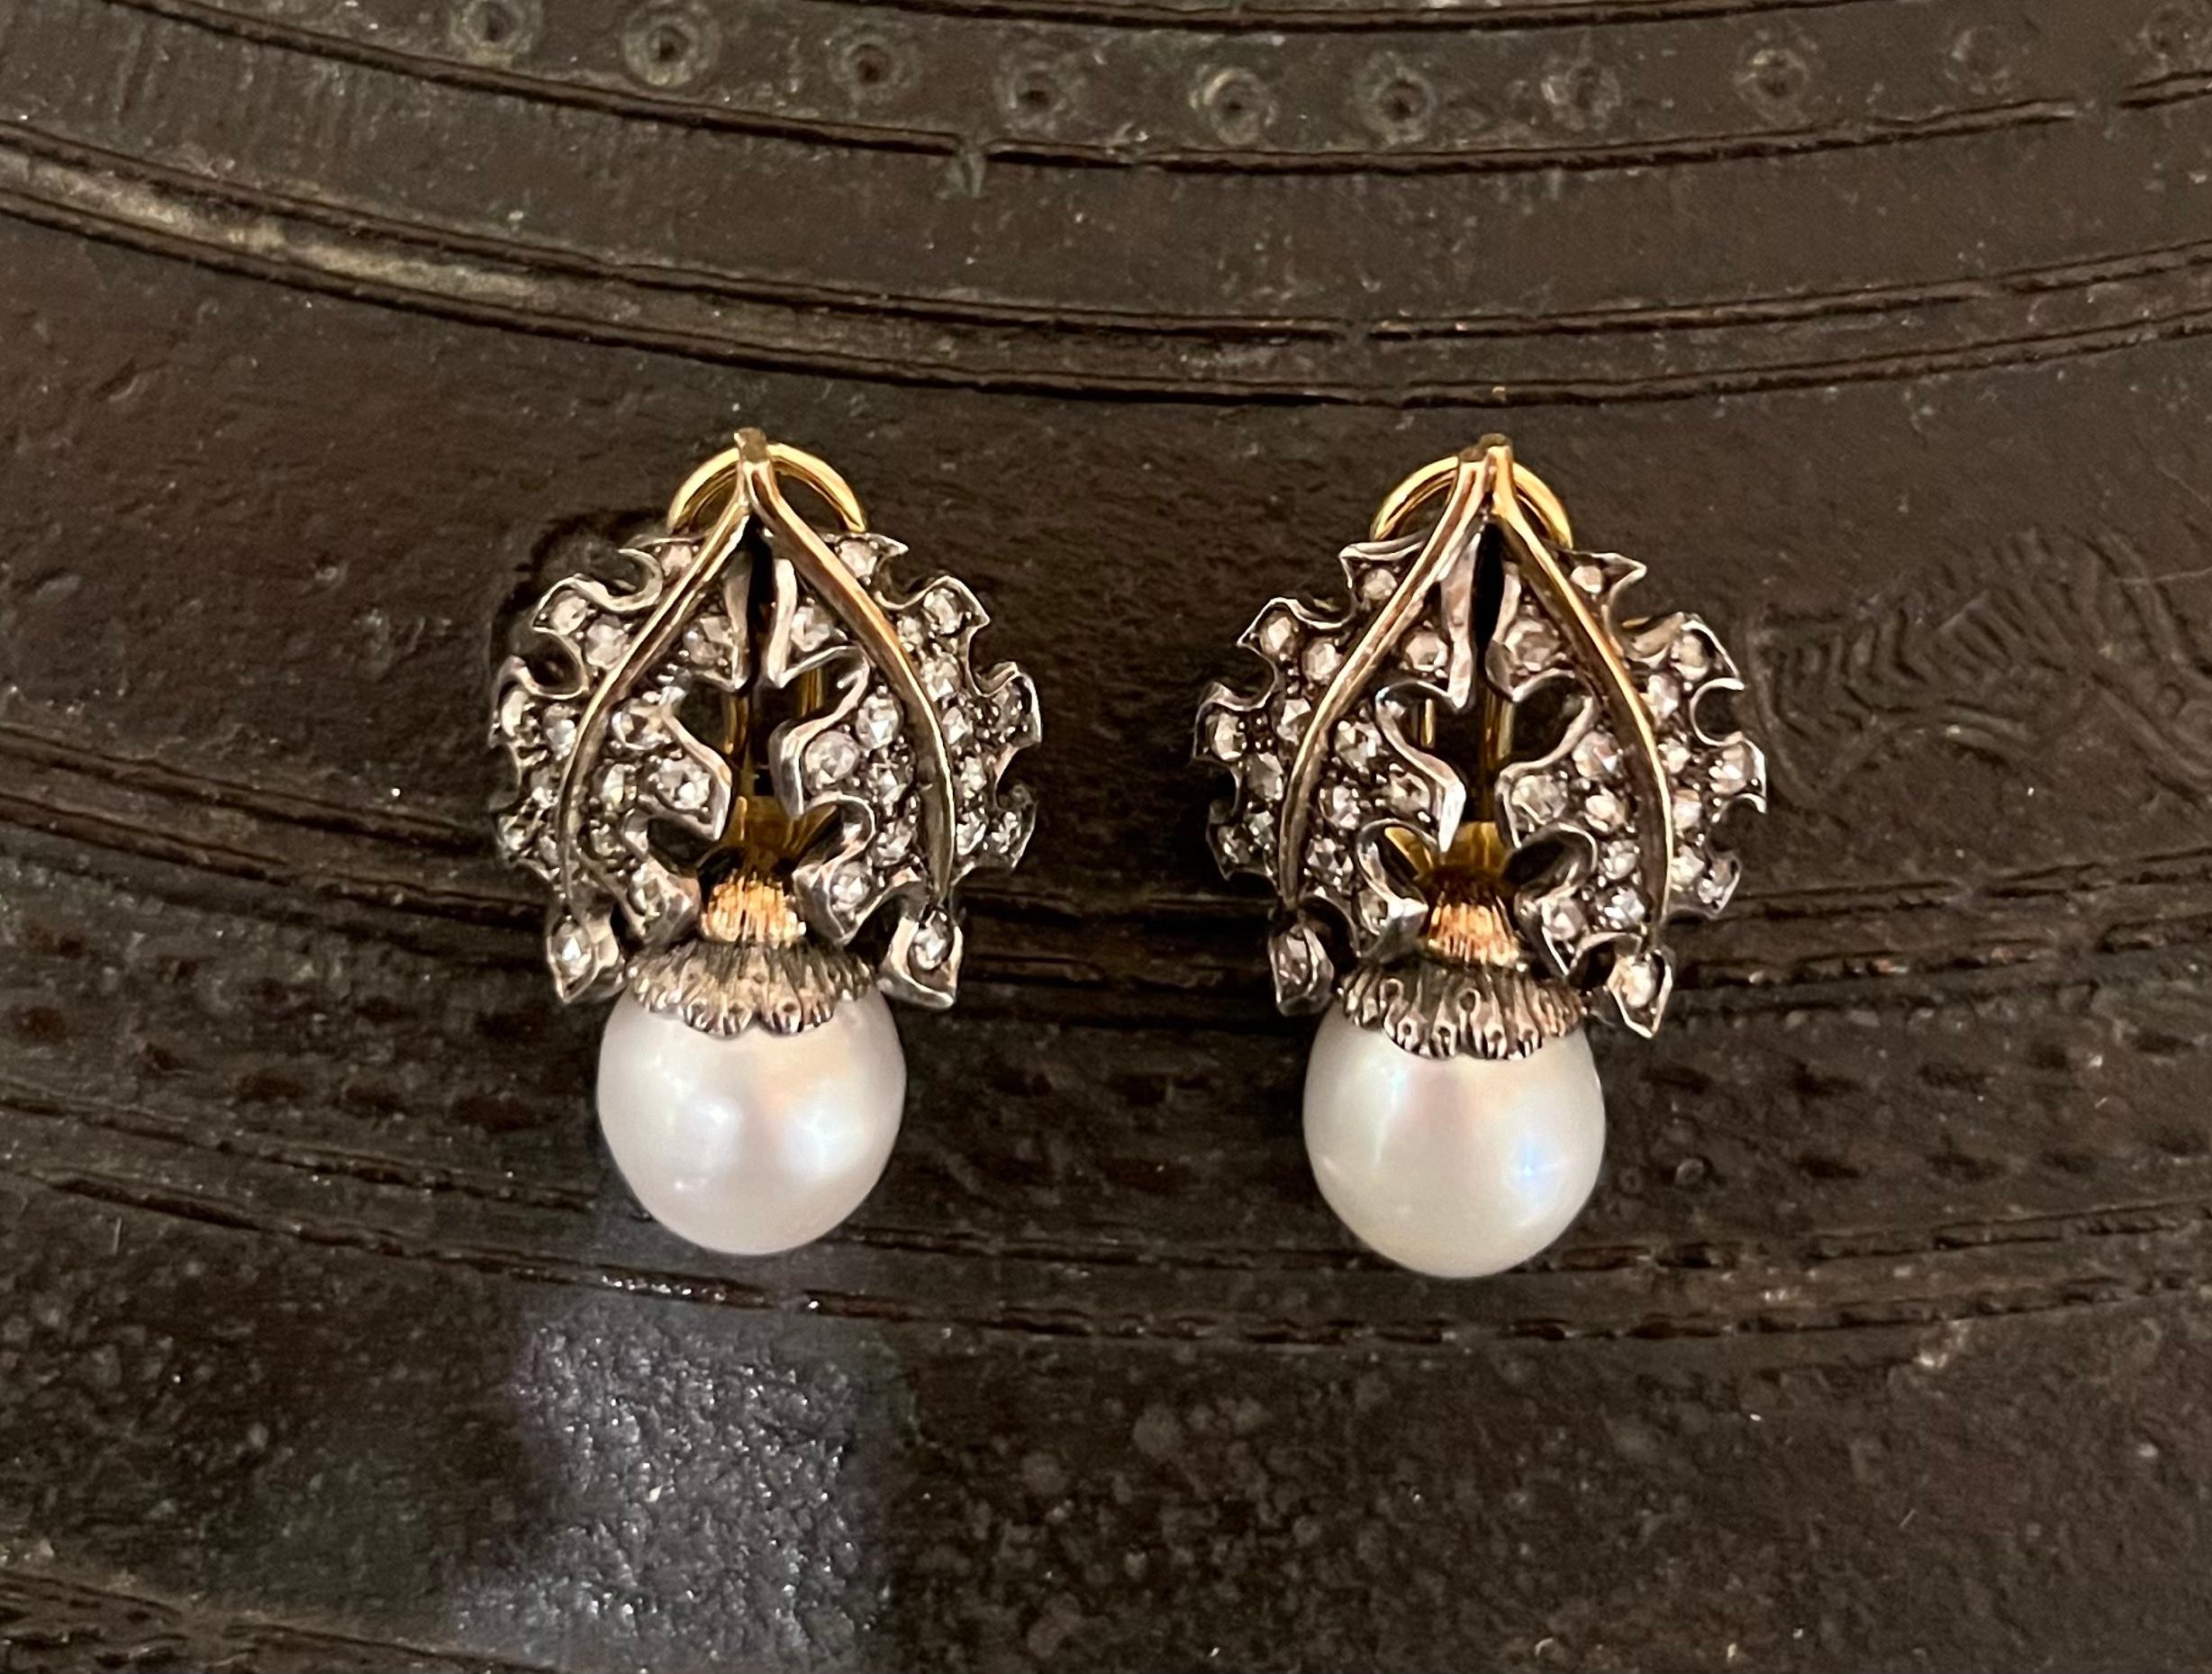 A pair of clip-on cultured pearls, rose cut diamonds (app. 1.15 cts), oxidized silver, and 18-karat gold earrings by Mario Buccellati, Italy. Signed M. Buccellati, 750, Italian Hallmarks. The earrings measure 1.27